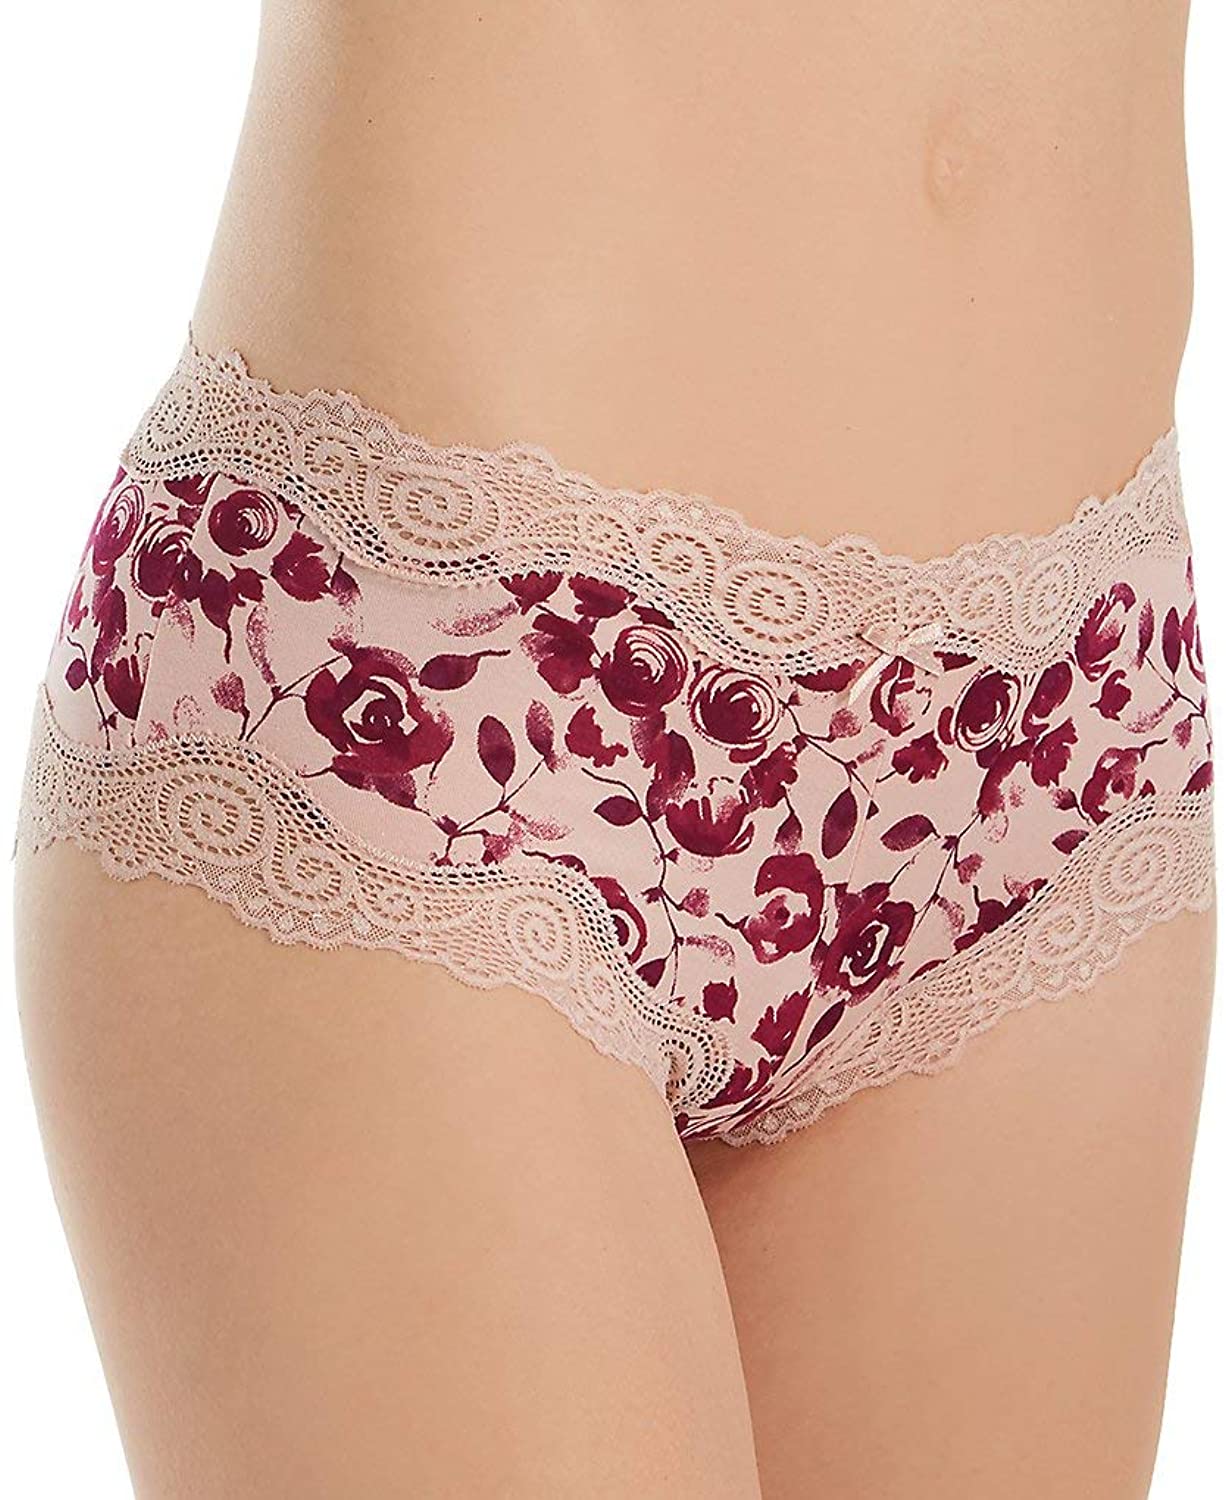 Maidenform-Maidenform Cheeky Scalloped Lace Hipster-Black/Rum Raisin Lace-7